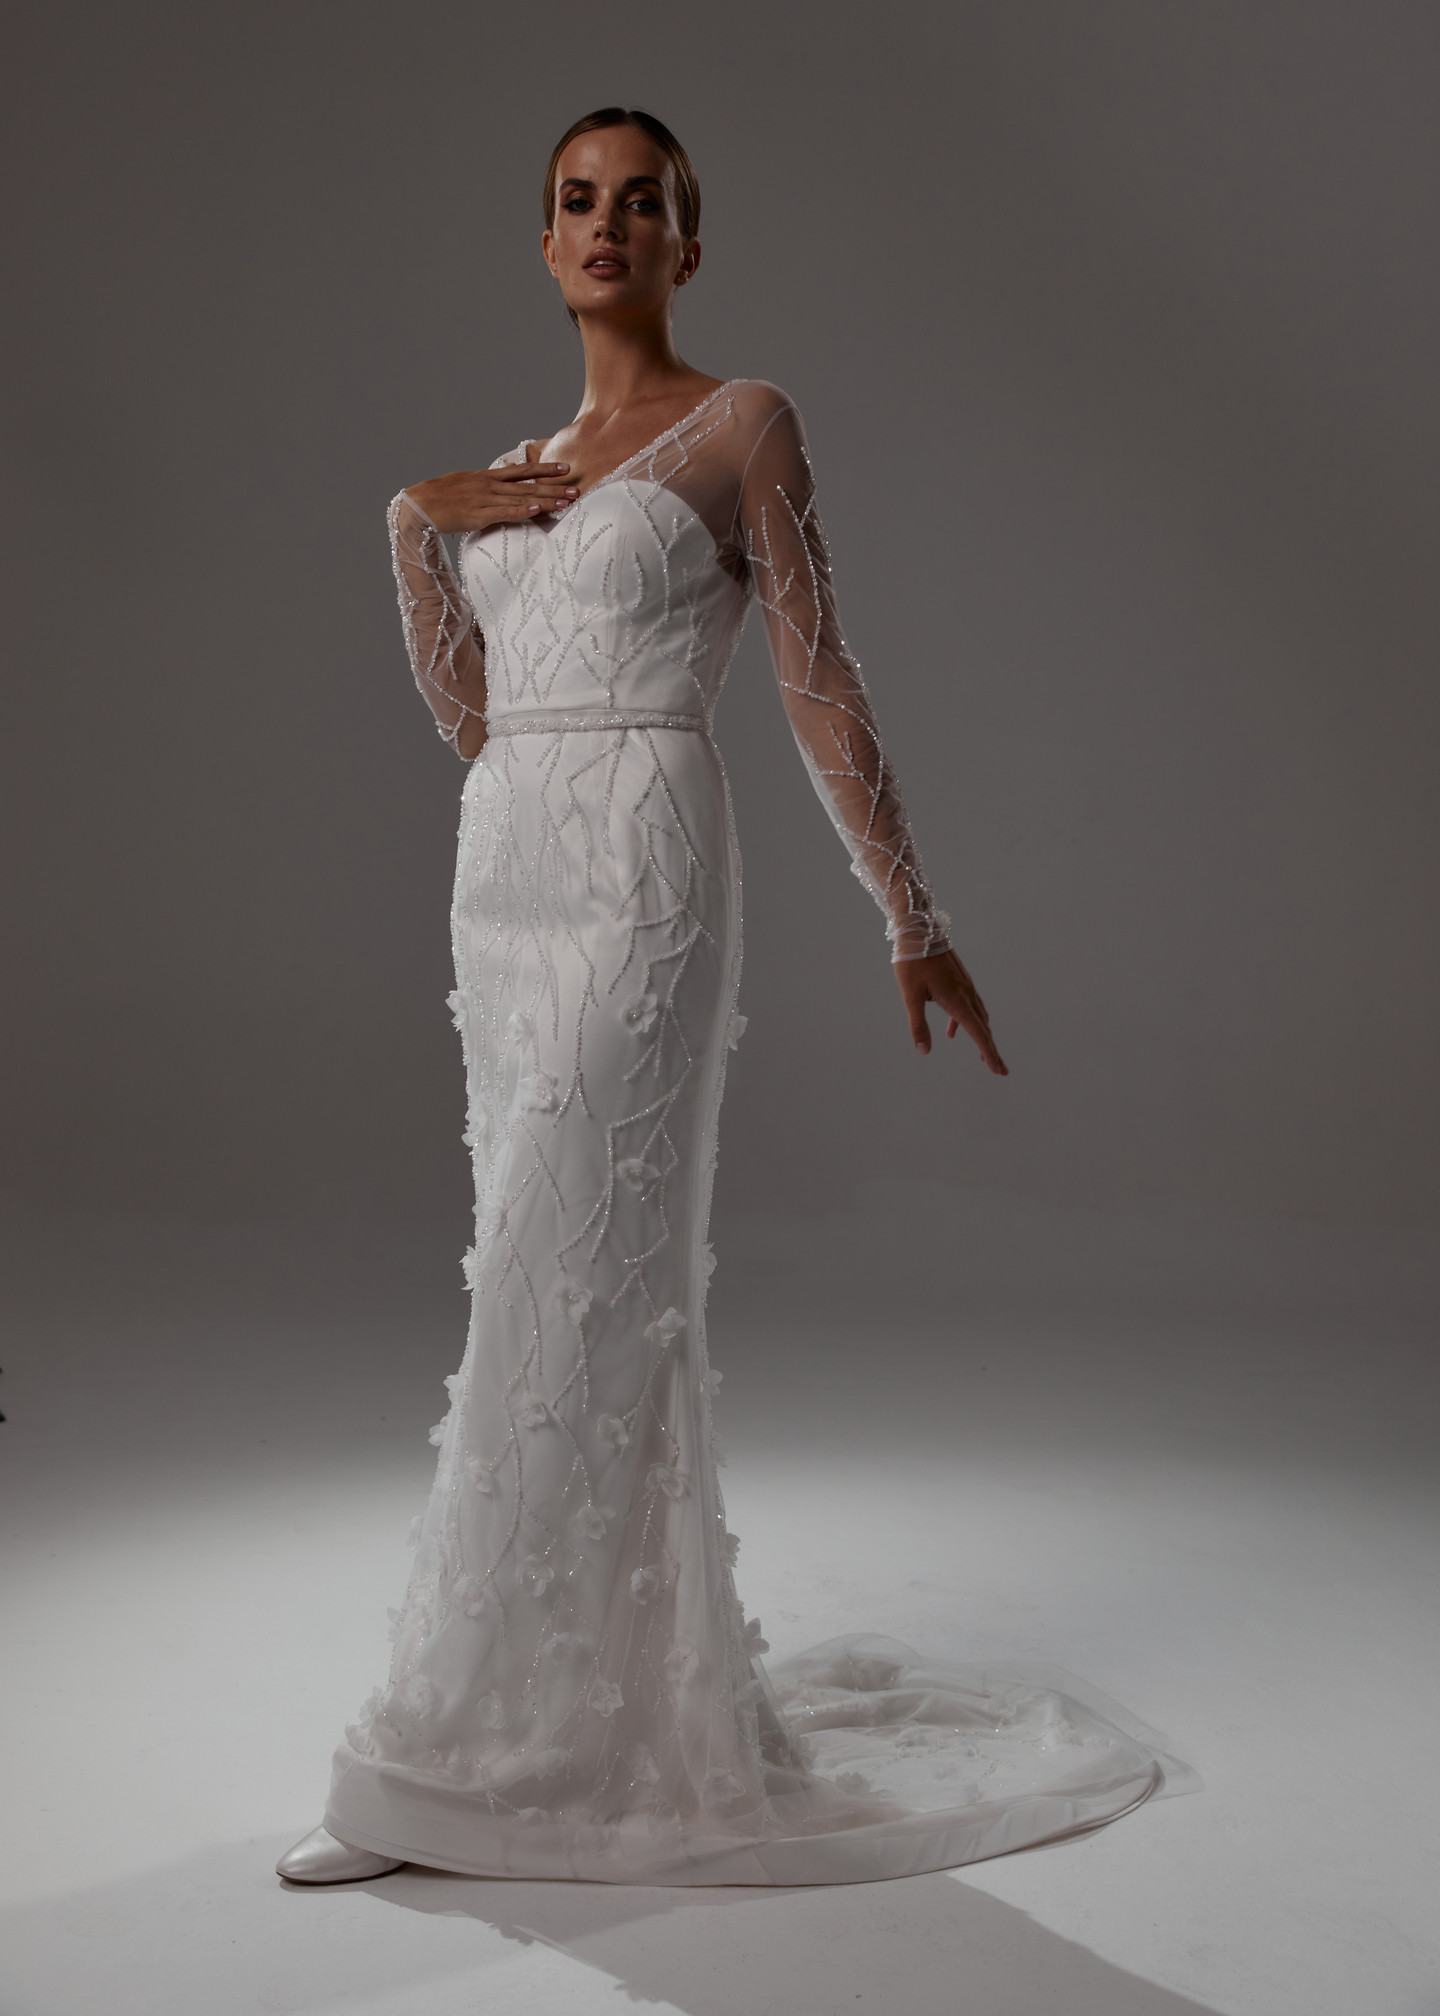 Vera dress, 2021, couture, dress, bridal, off-white, embroidery, sheath silhouette, sleeves, train